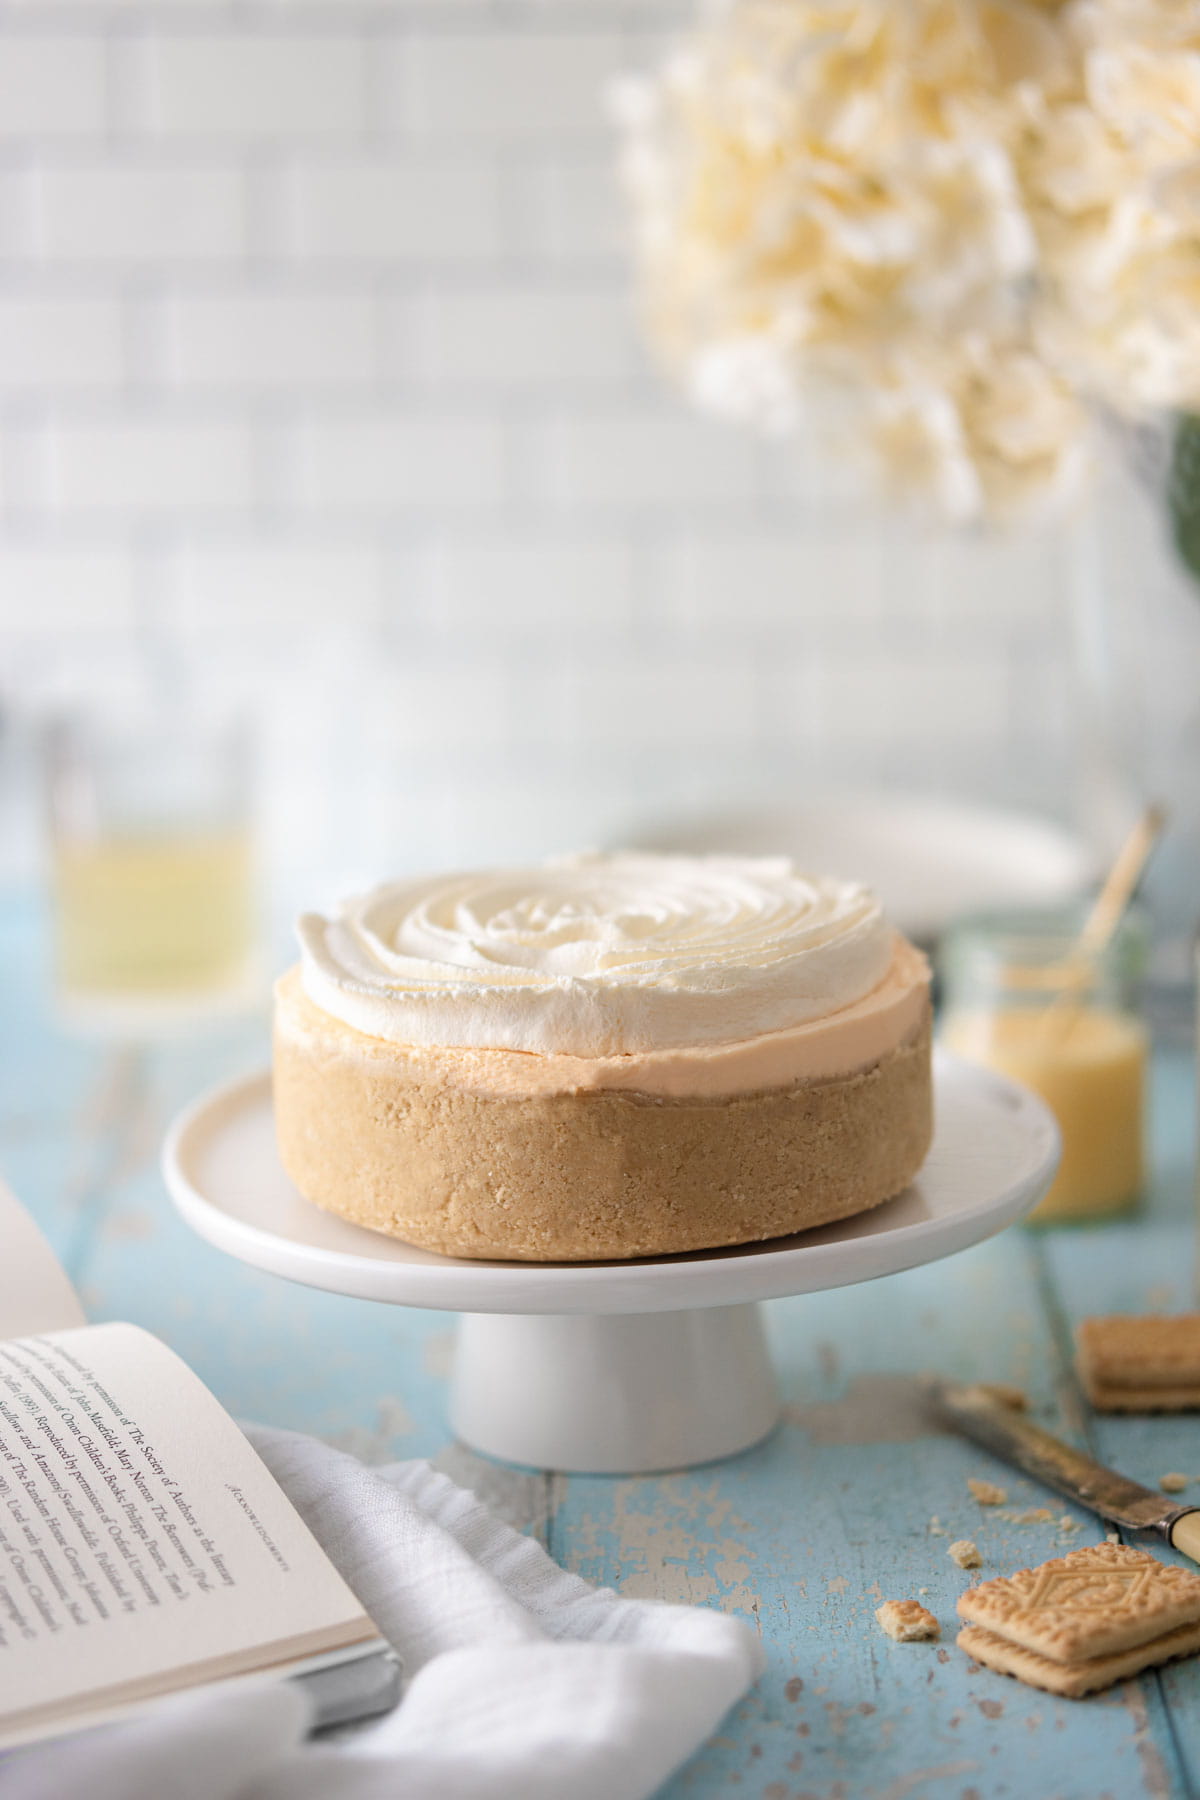 A no bake custard cream cheesecake with a swirl of cream on top, on a white cake stand